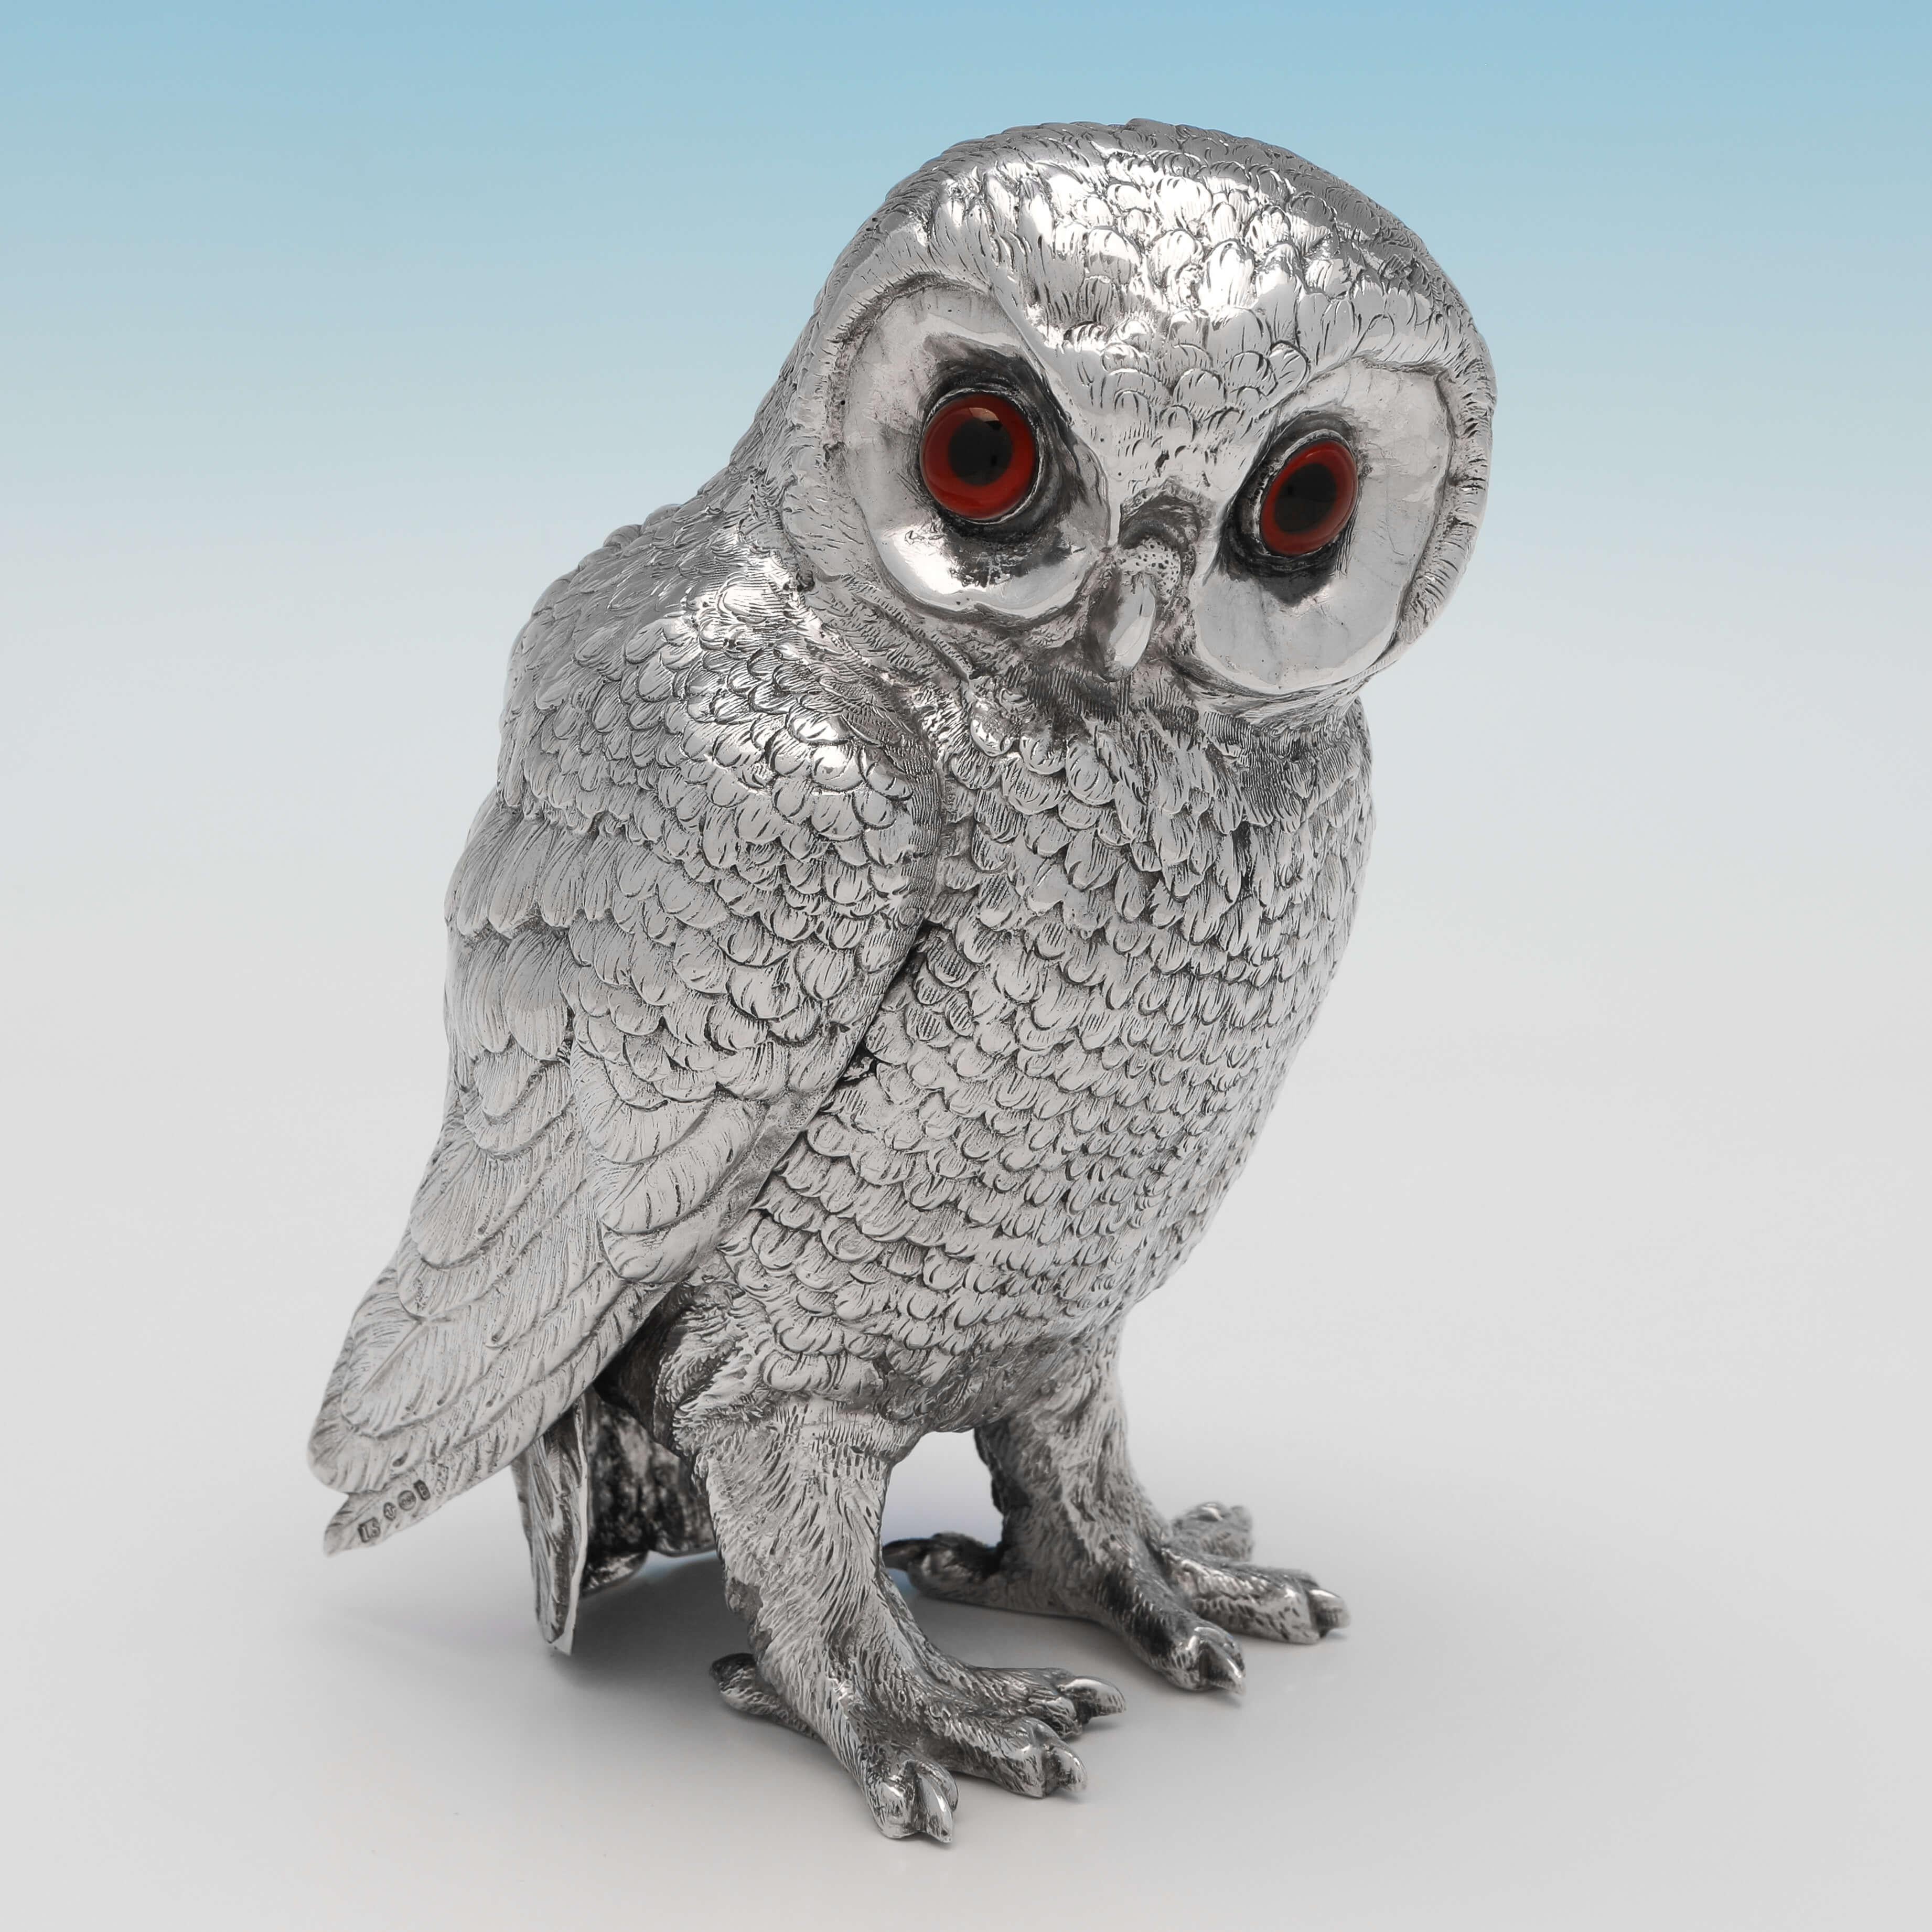 Carrying import marks for 1937 by Israel Segalov, this very rare pair of Sterling Silver Owl Models, were originally made in Germany for the English market, by the great model making firm of Neresheimer & Sohne, and they can be seen in the firms